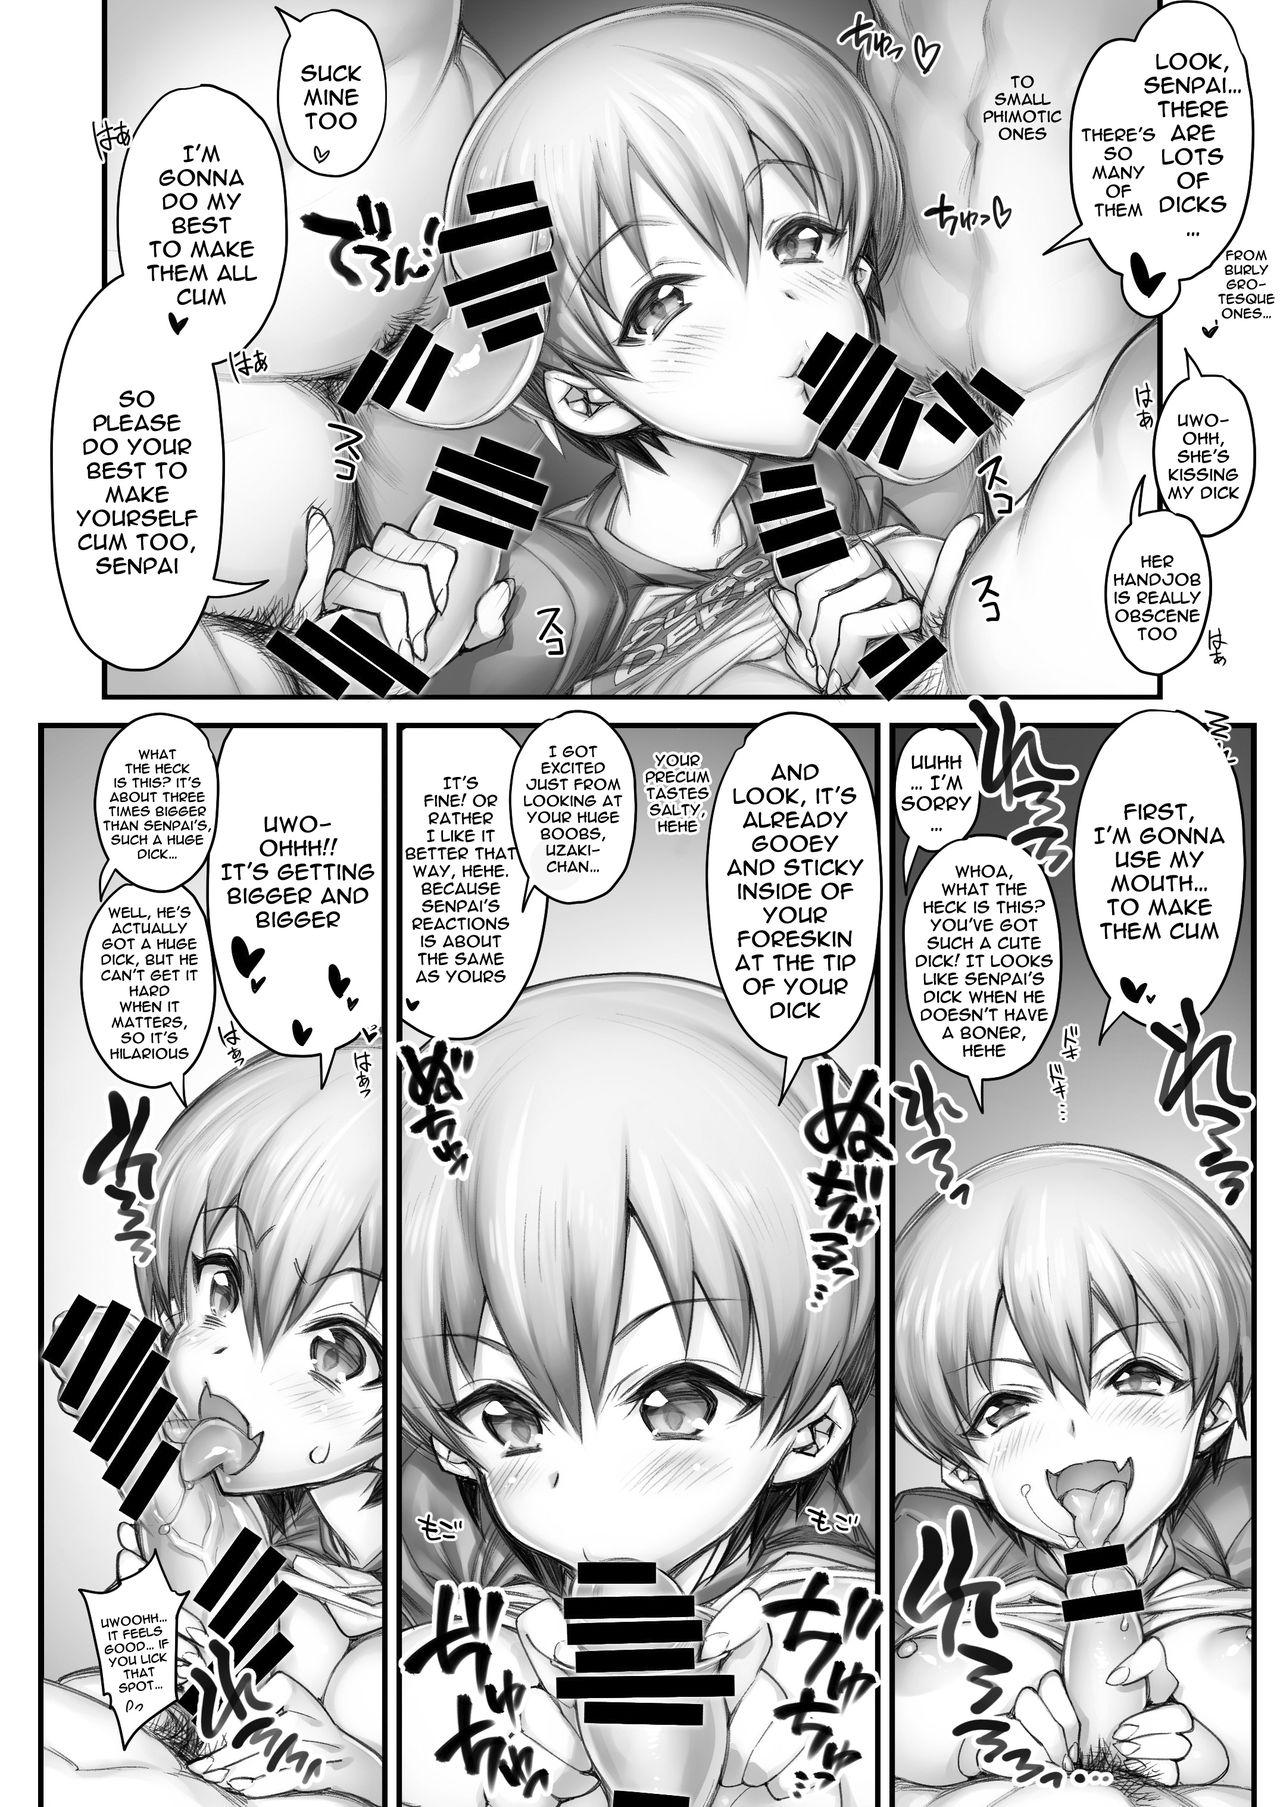 Francaise Uzaki-chan Wants To Message To Senpai Videos Of Her Having Sex With Lots of Men!! - Uzaki-chan wa asobitai Cocksuckers - Page 4